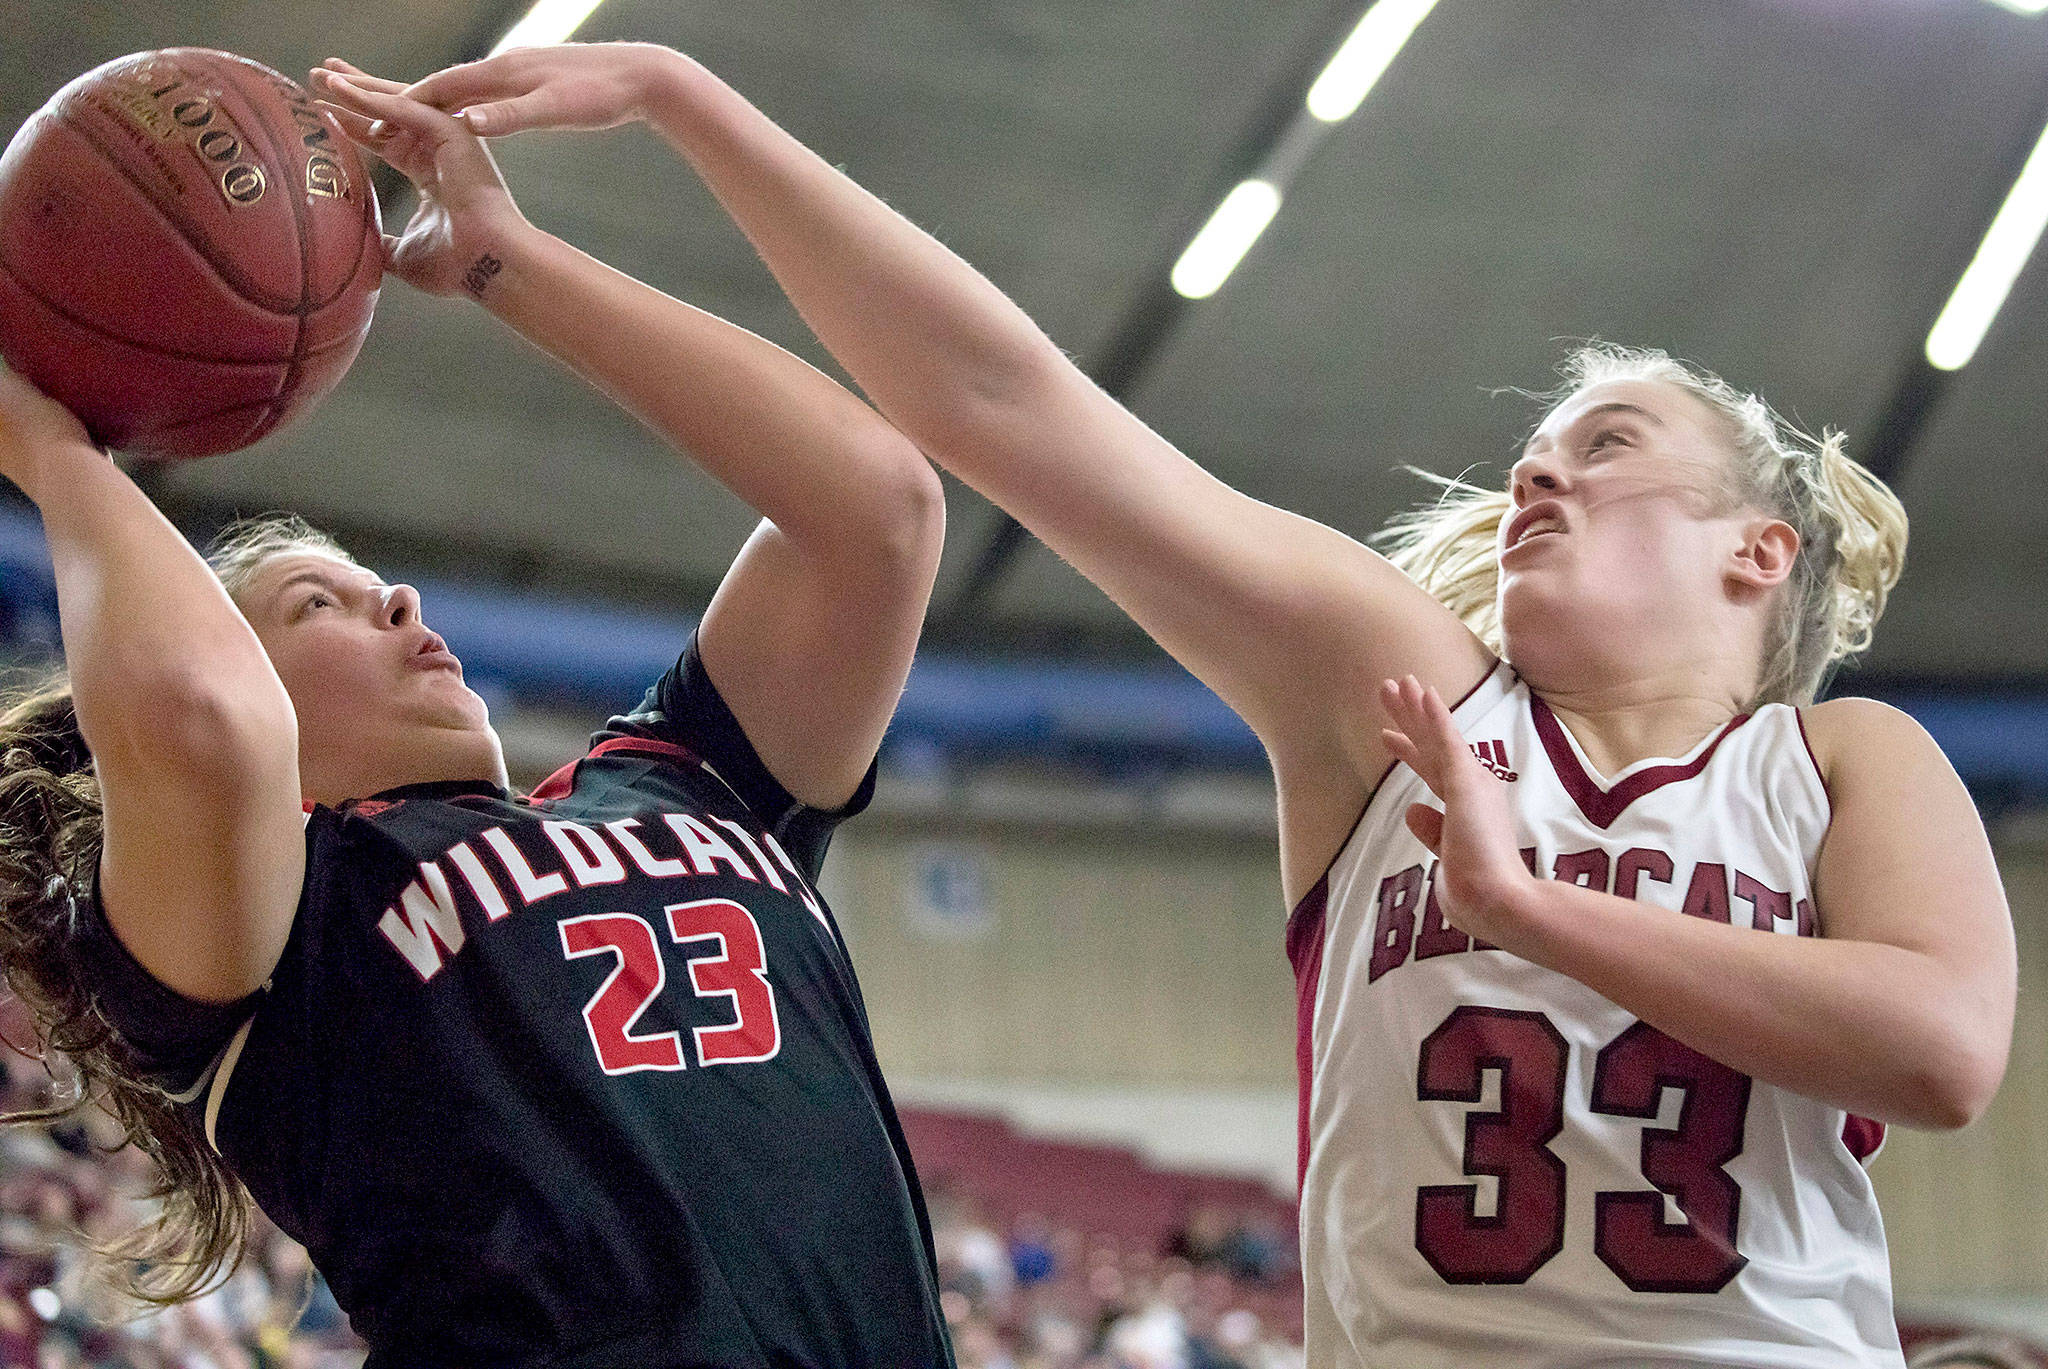 Archbishop Murphy’s Natalie Hayward (23) scores over W.F. West’s Annika Waring (33) in the championship game of the 2A girls Hardwood Classic on March 3, 2018, at the Yakima Valley SunDome. W.F. West defeated Archbishop Murphy 64-52. (TJ Mullinax / for The Herald)